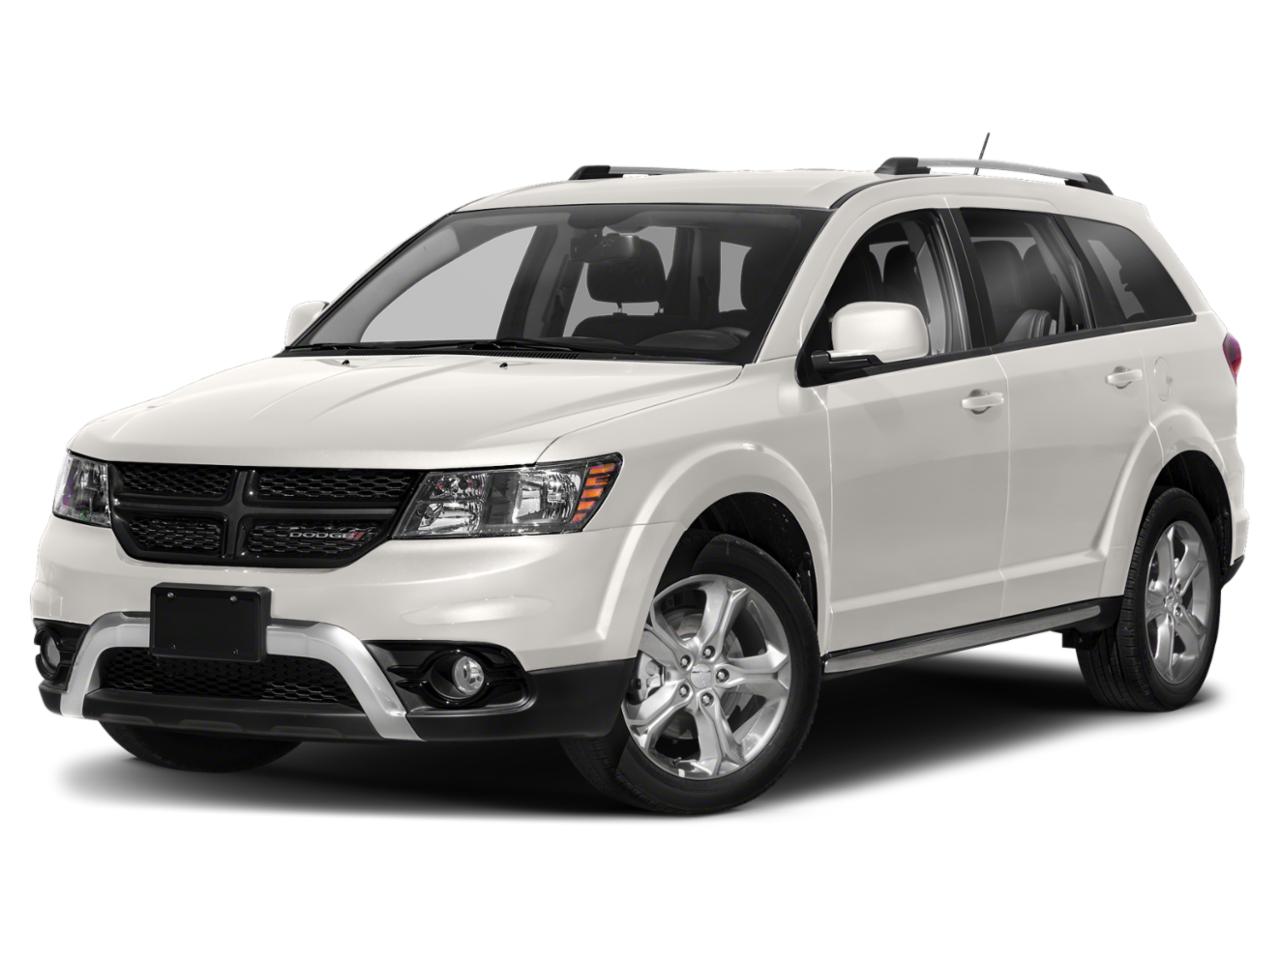 2019 Dodge Journey Vehicle Photo in South Hill, VA 23970